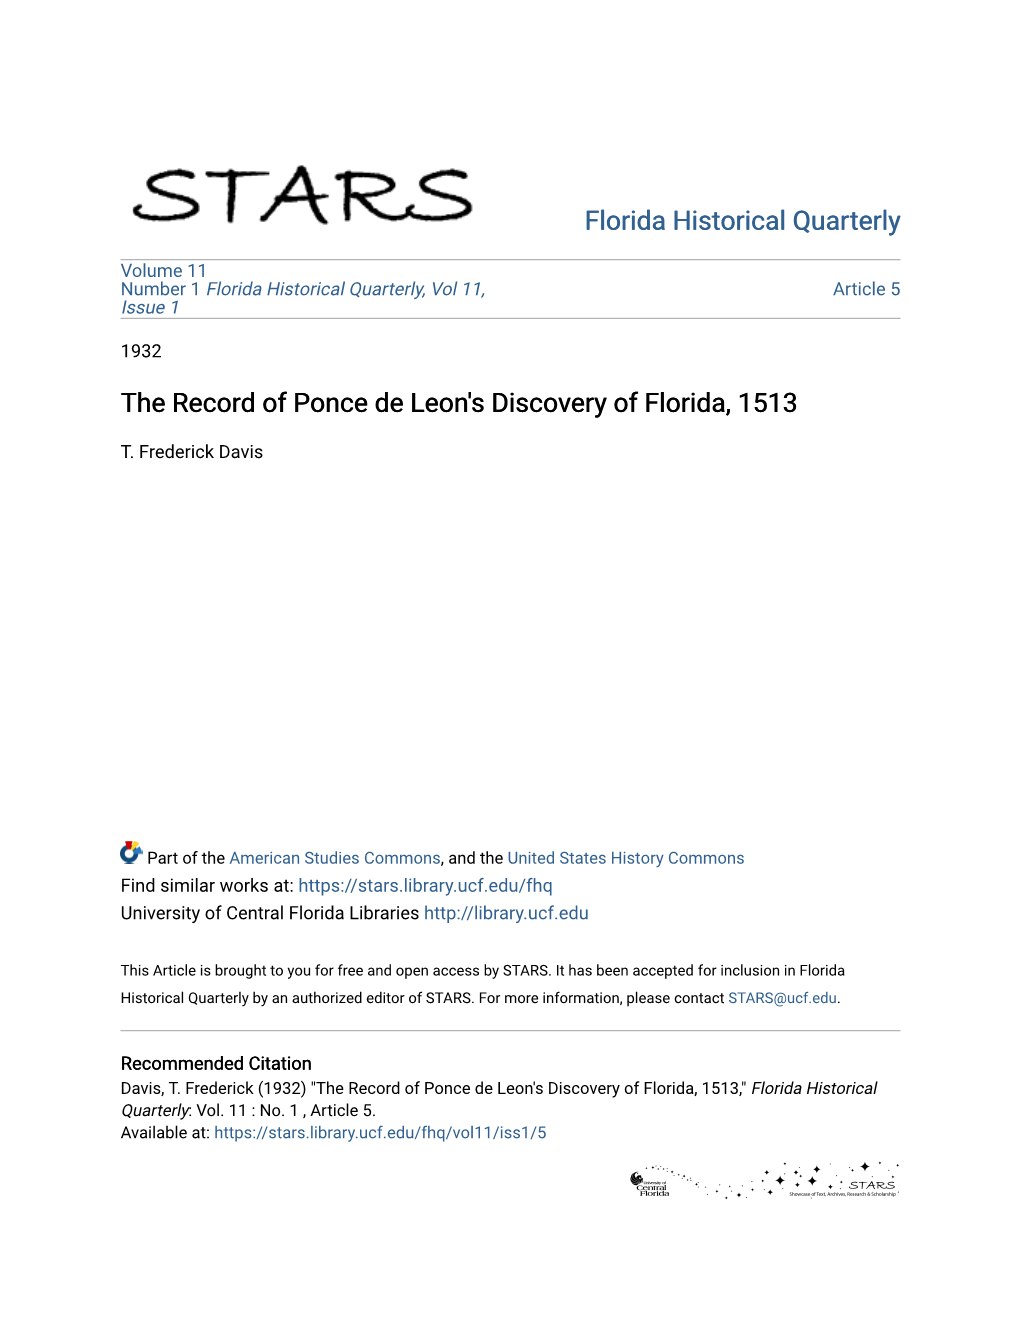 The Record of Ponce De Leon's Discovery of Florida, 1513